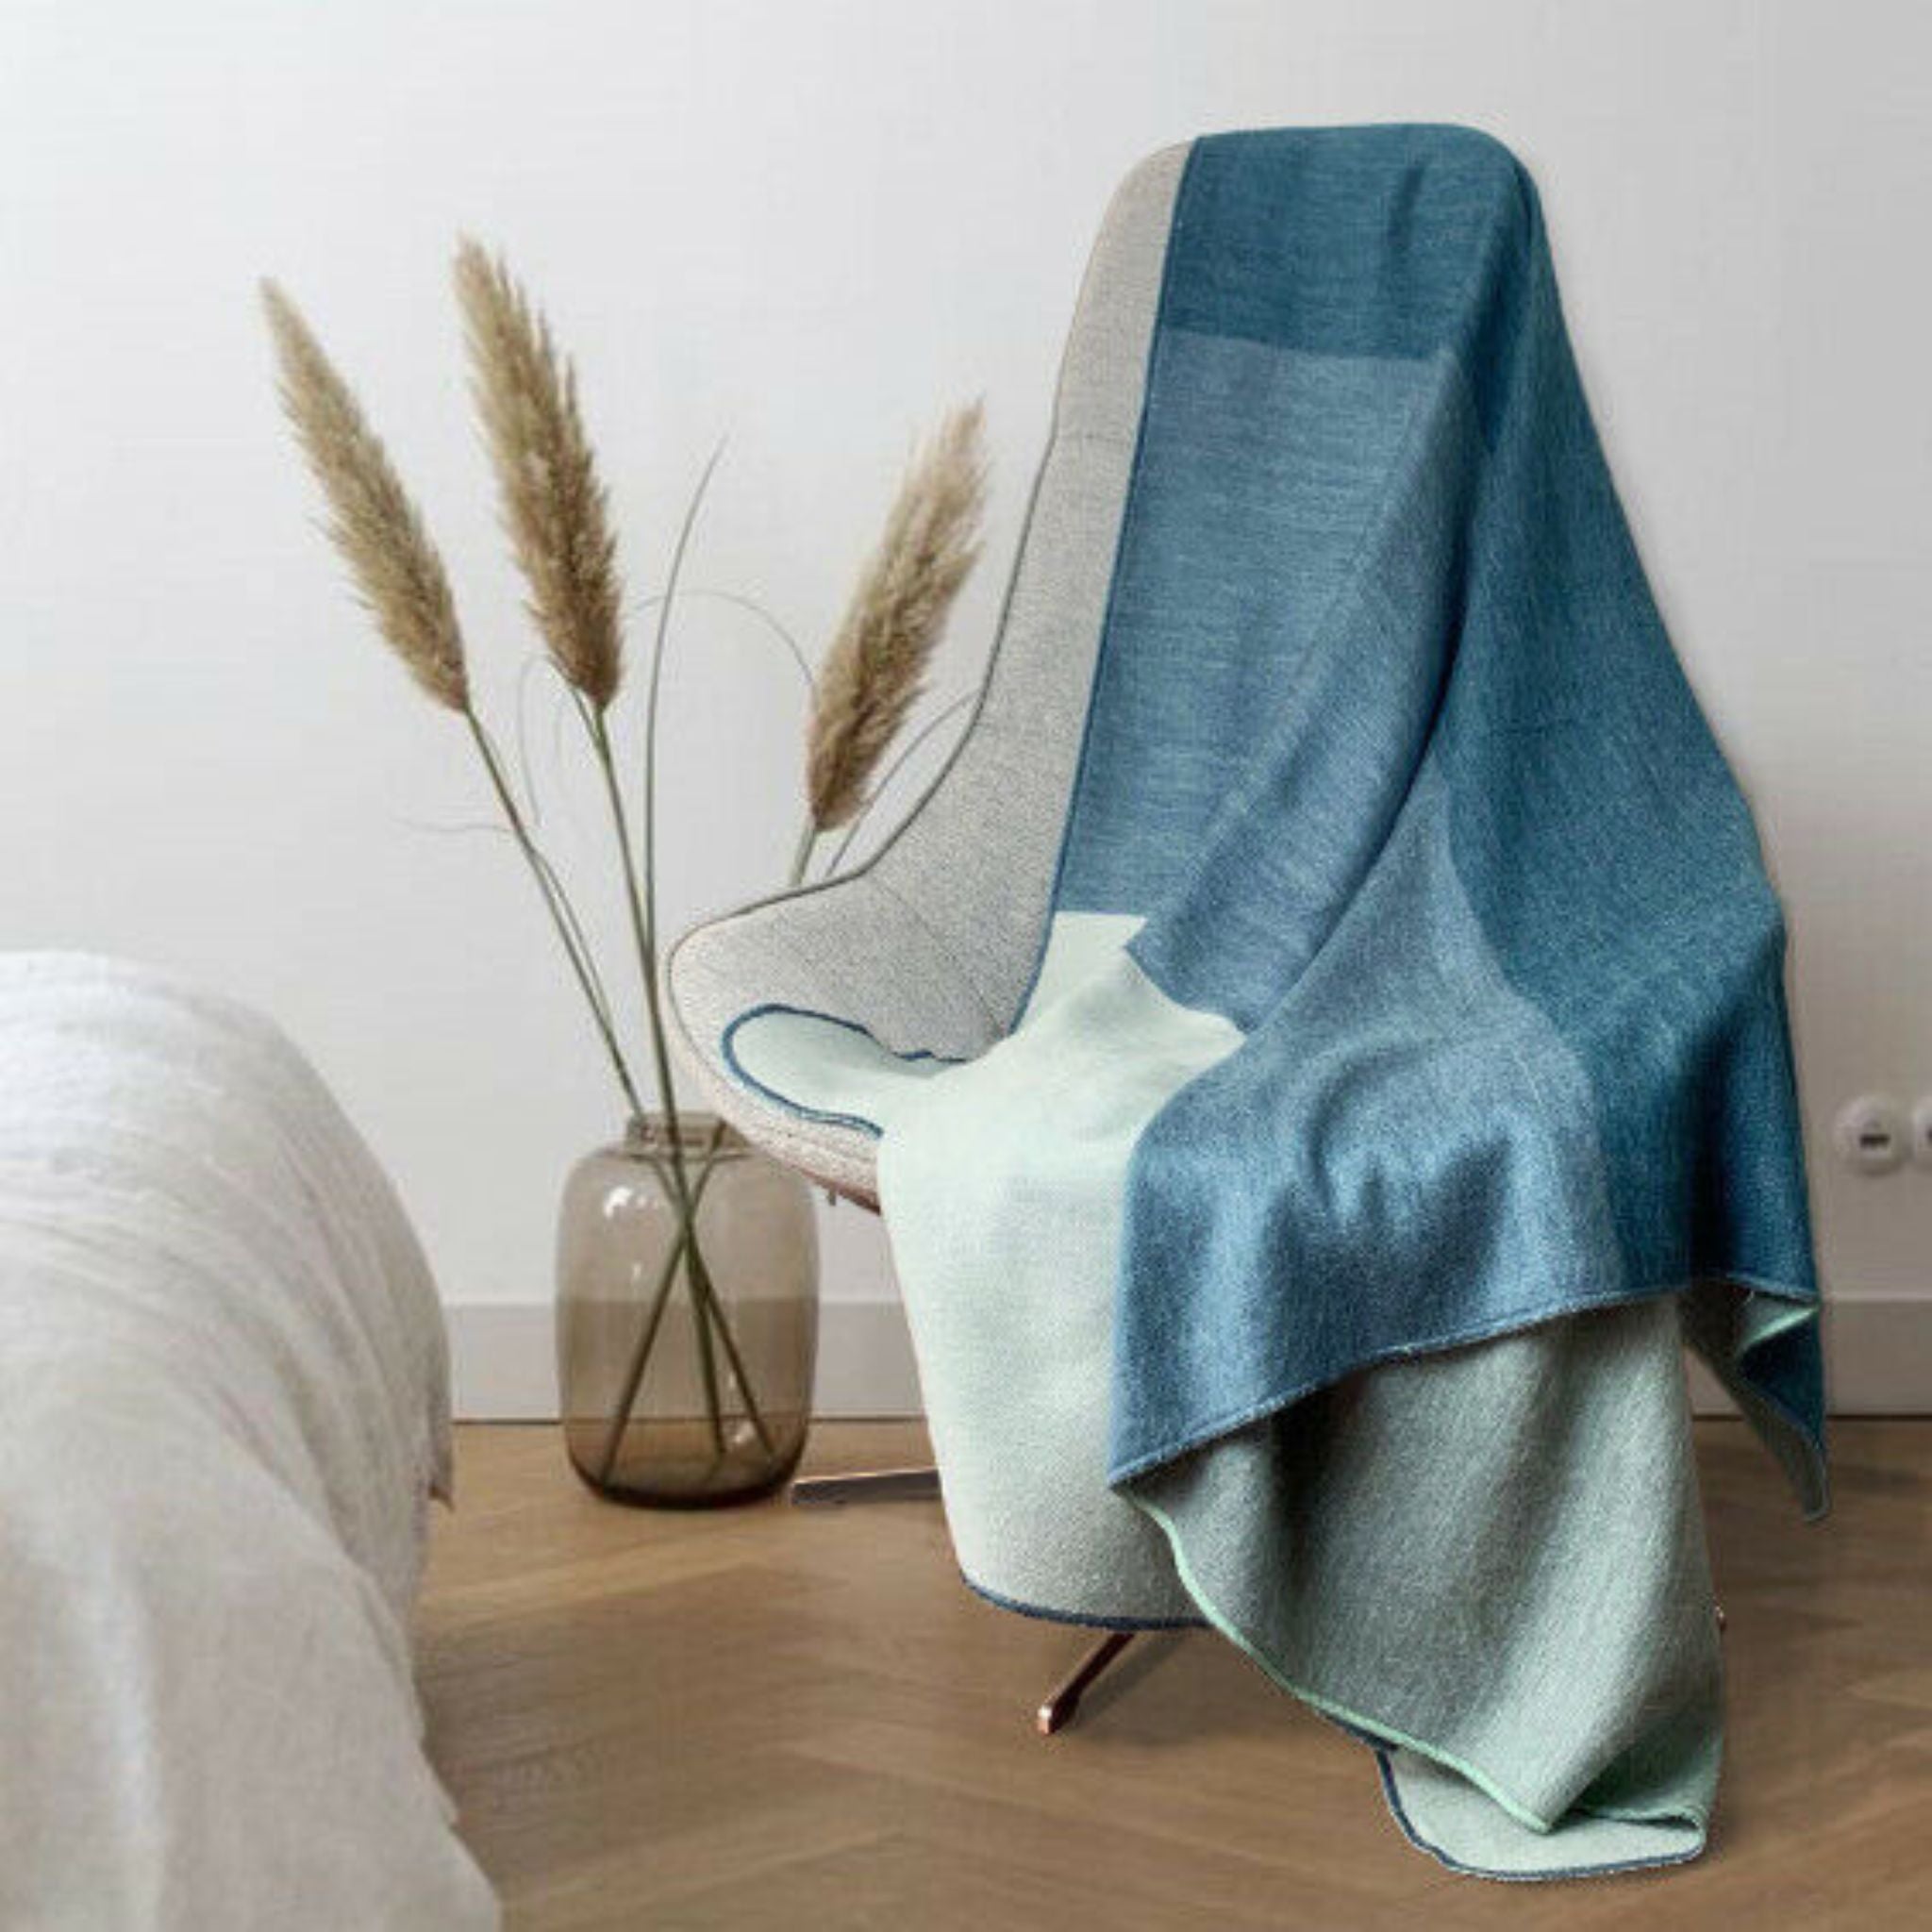 This beautiful alpaca wool blanket will keep you warm and cozy even on the coldest nights plus give your space a touch of class. Alpaca blankets are the finest in the world. It is incredibly soft and warm. Throw it over your couch, armchair or bed for a beautiful accent.